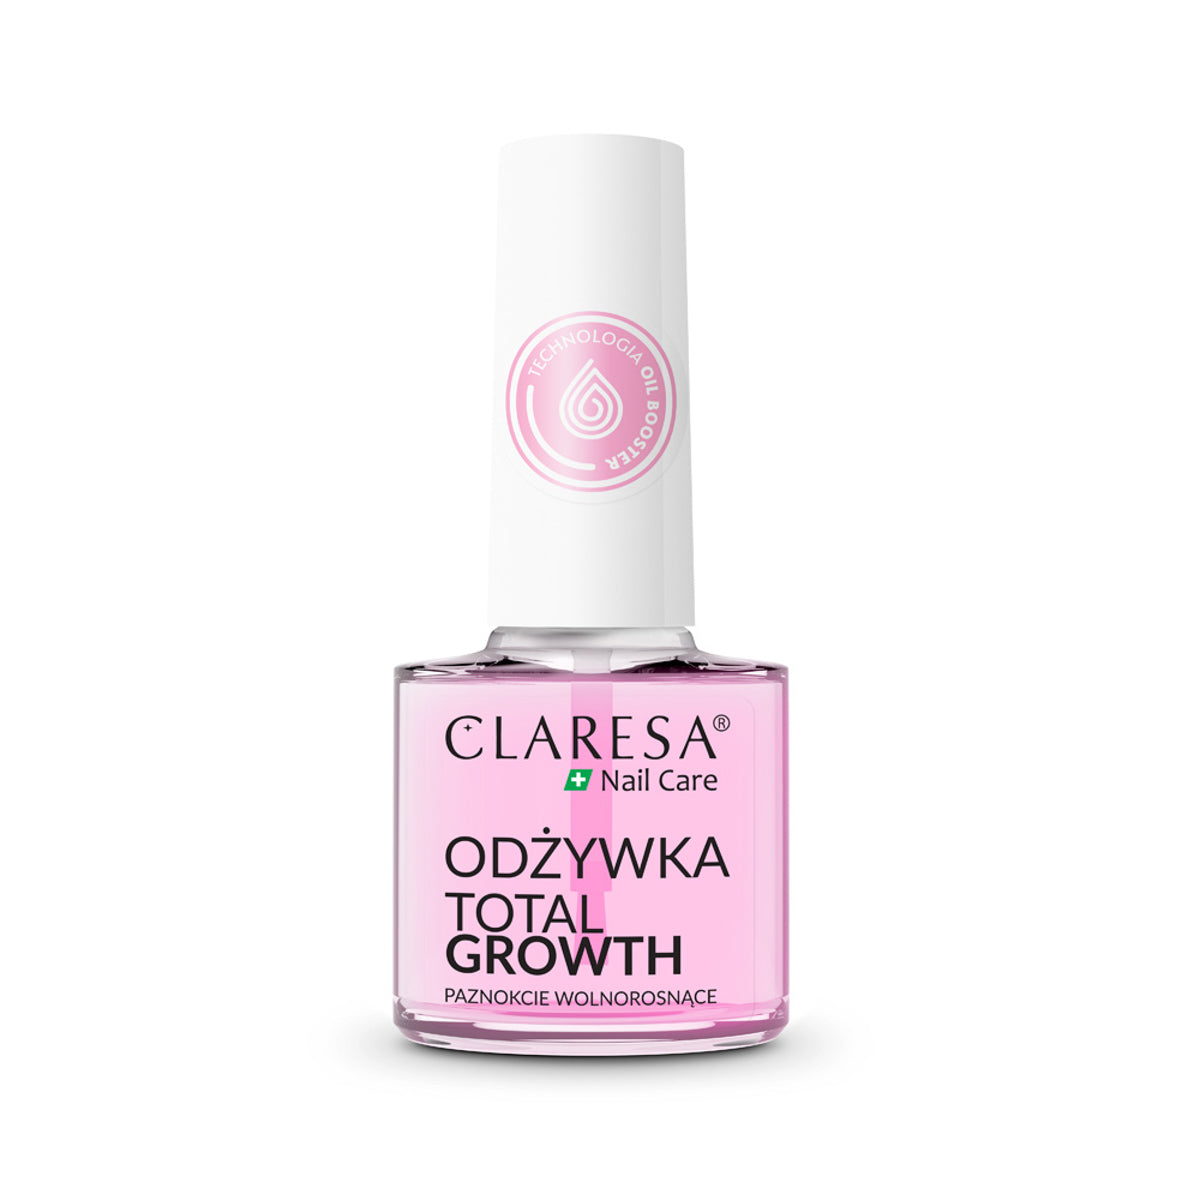 CLARESA Total Growth nagelconditioner 5 g